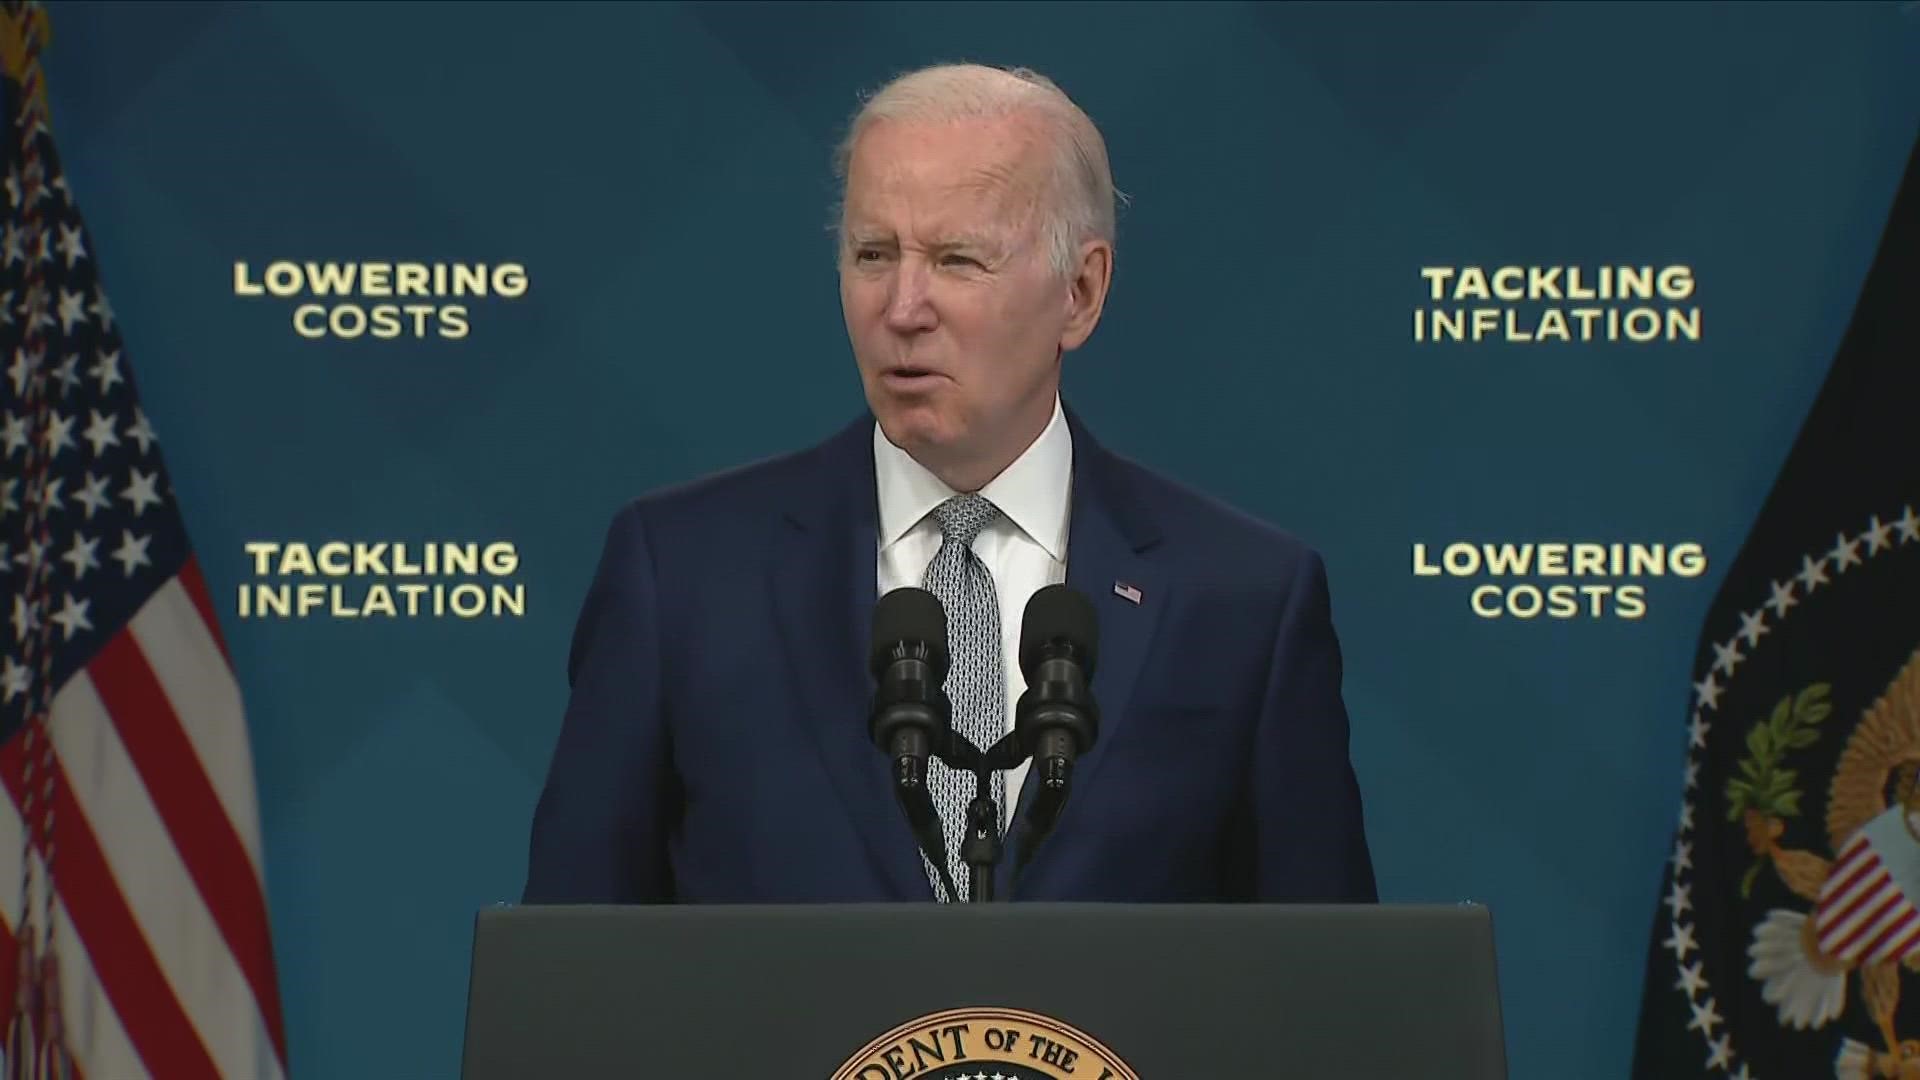 President Biden on Tuesday worked to contrast the different plans offered by Democrats and Republicans to fight rising inflation.